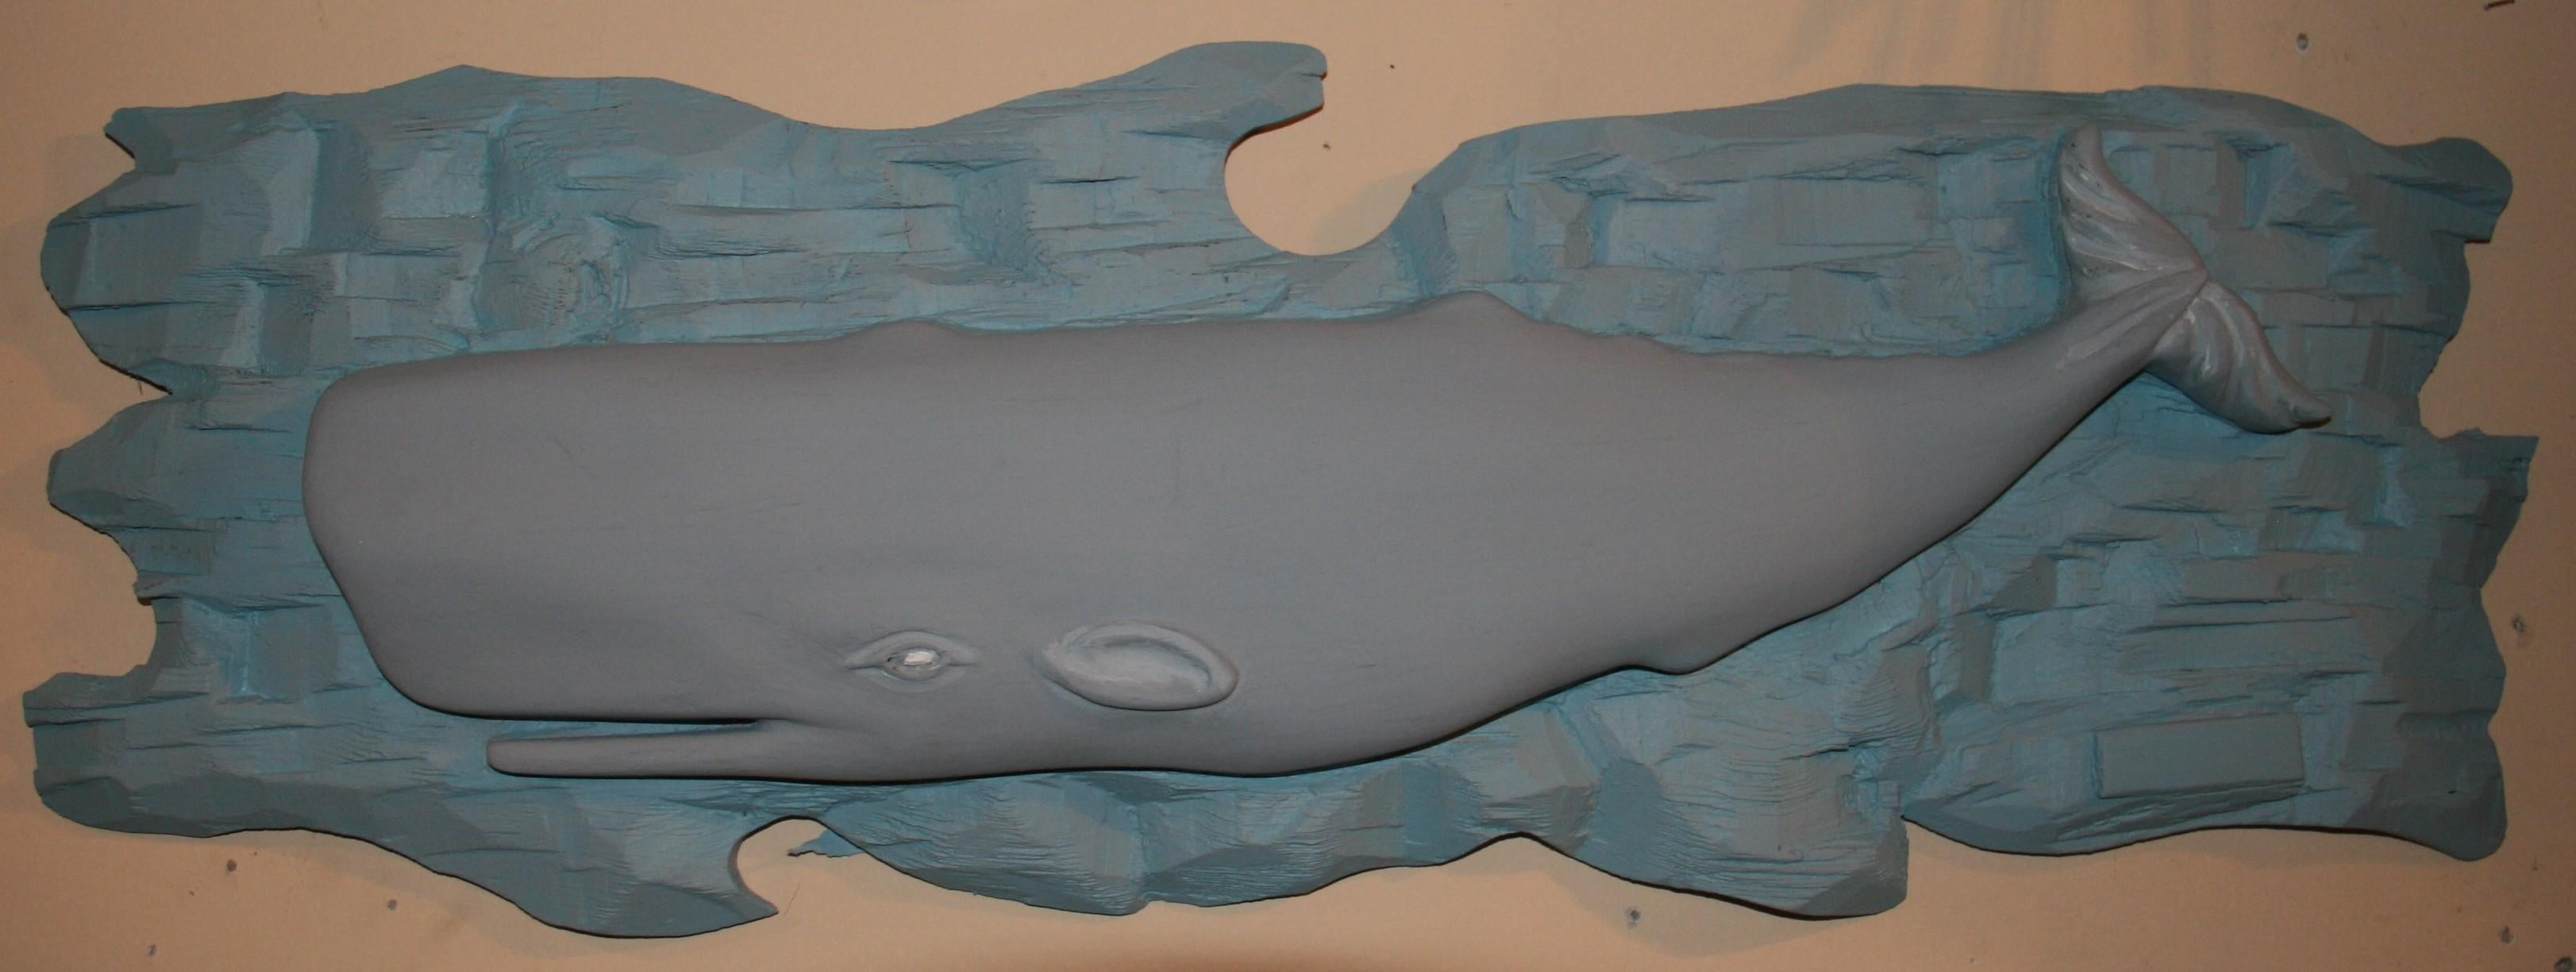 Provincetown Folk Art Carved Wood Whale Wall Sculpture For Sale 4